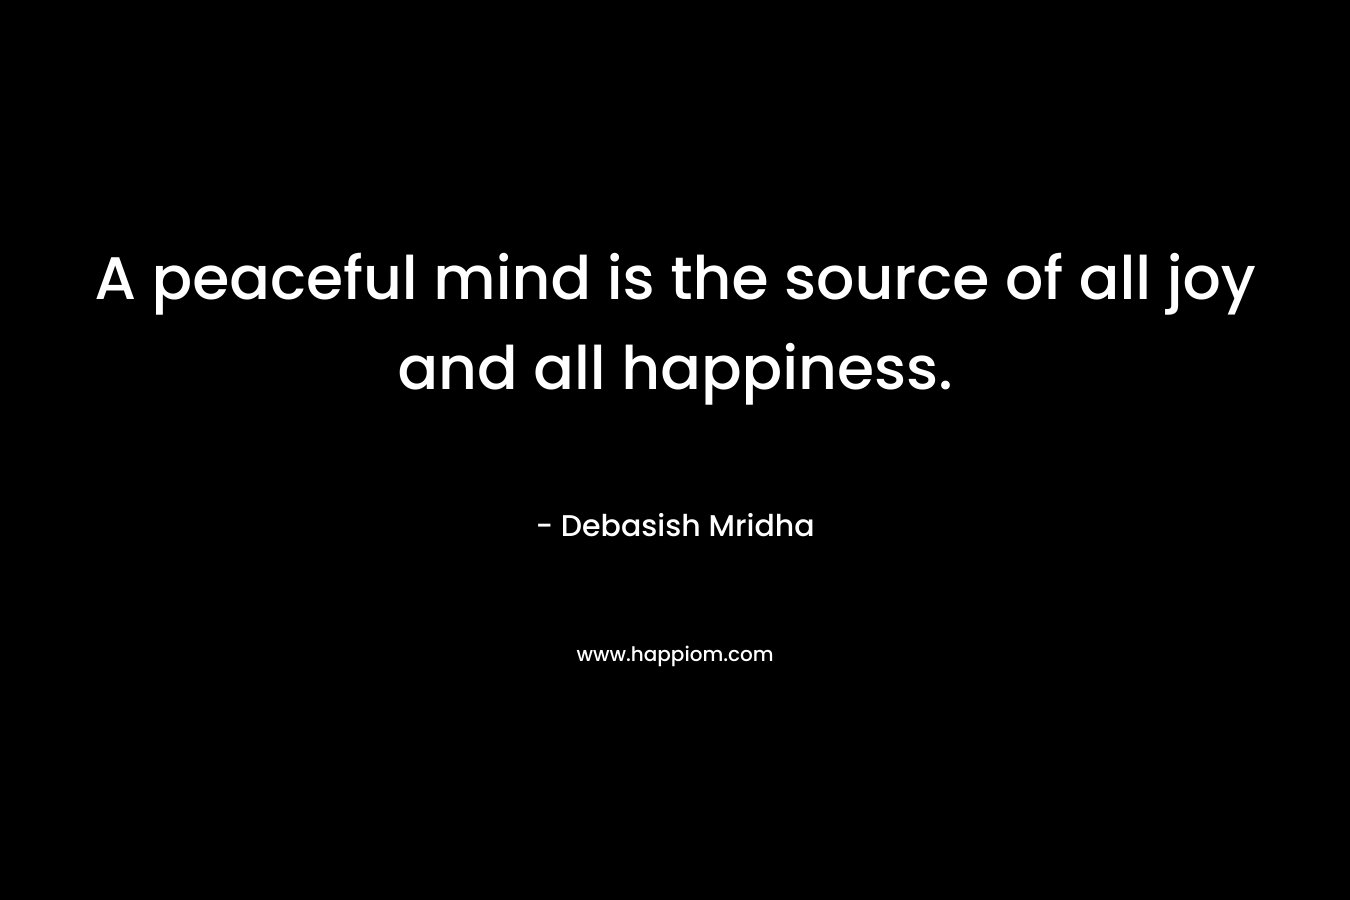 A peaceful mind is the source of all joy and all happiness.